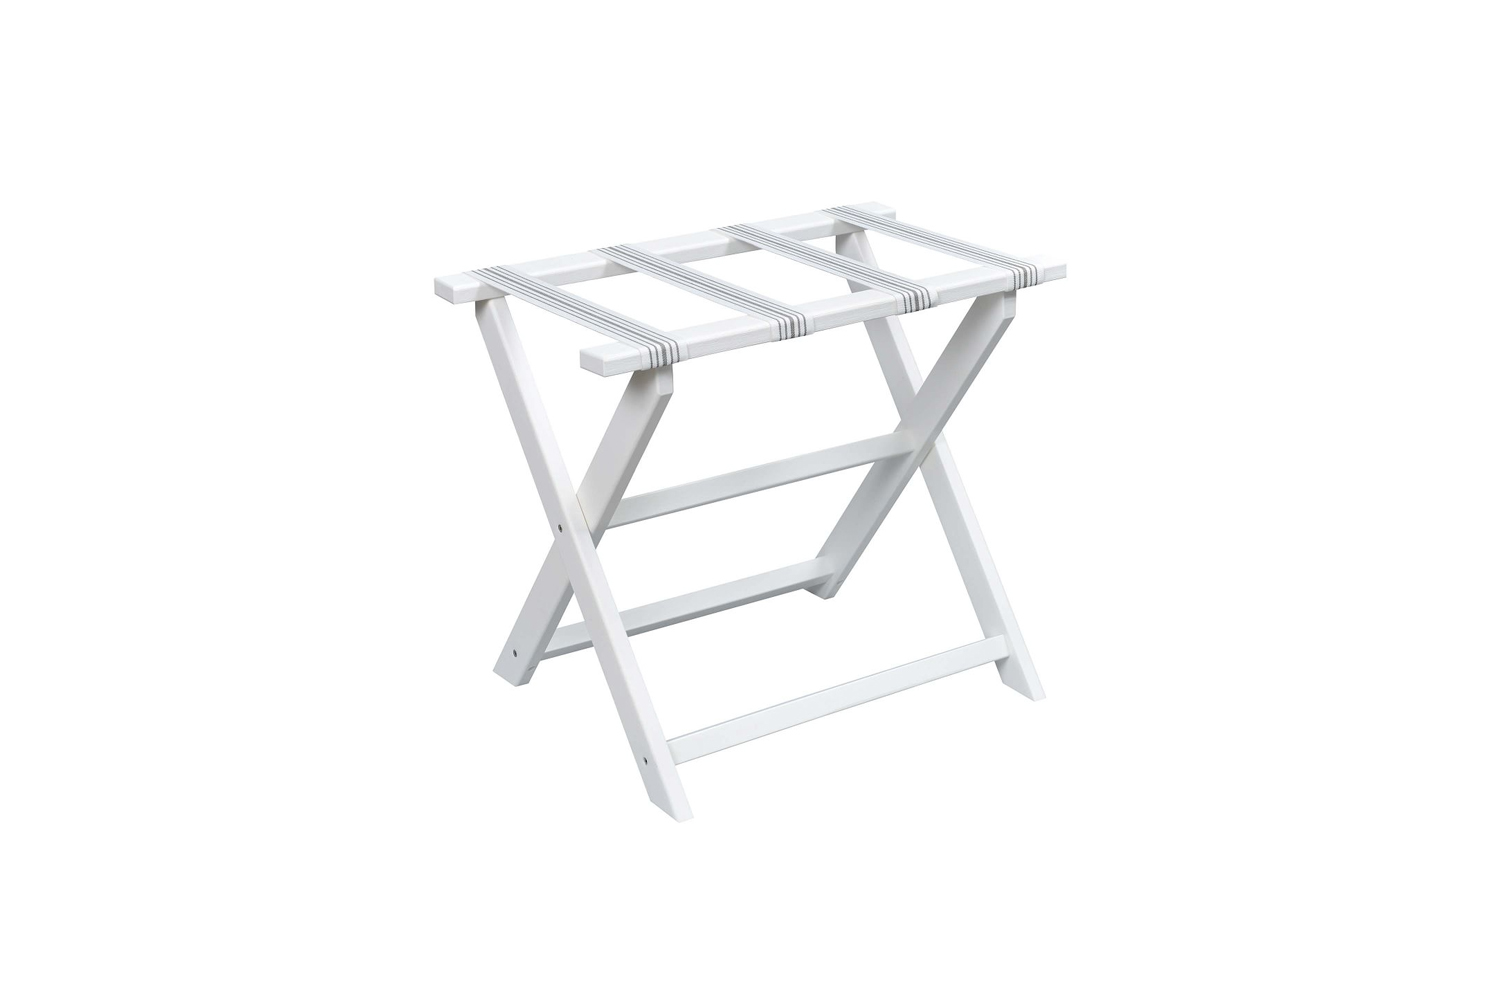 the classic stripes luggage rack comes in a range of colored stripes; \$\250 at 10